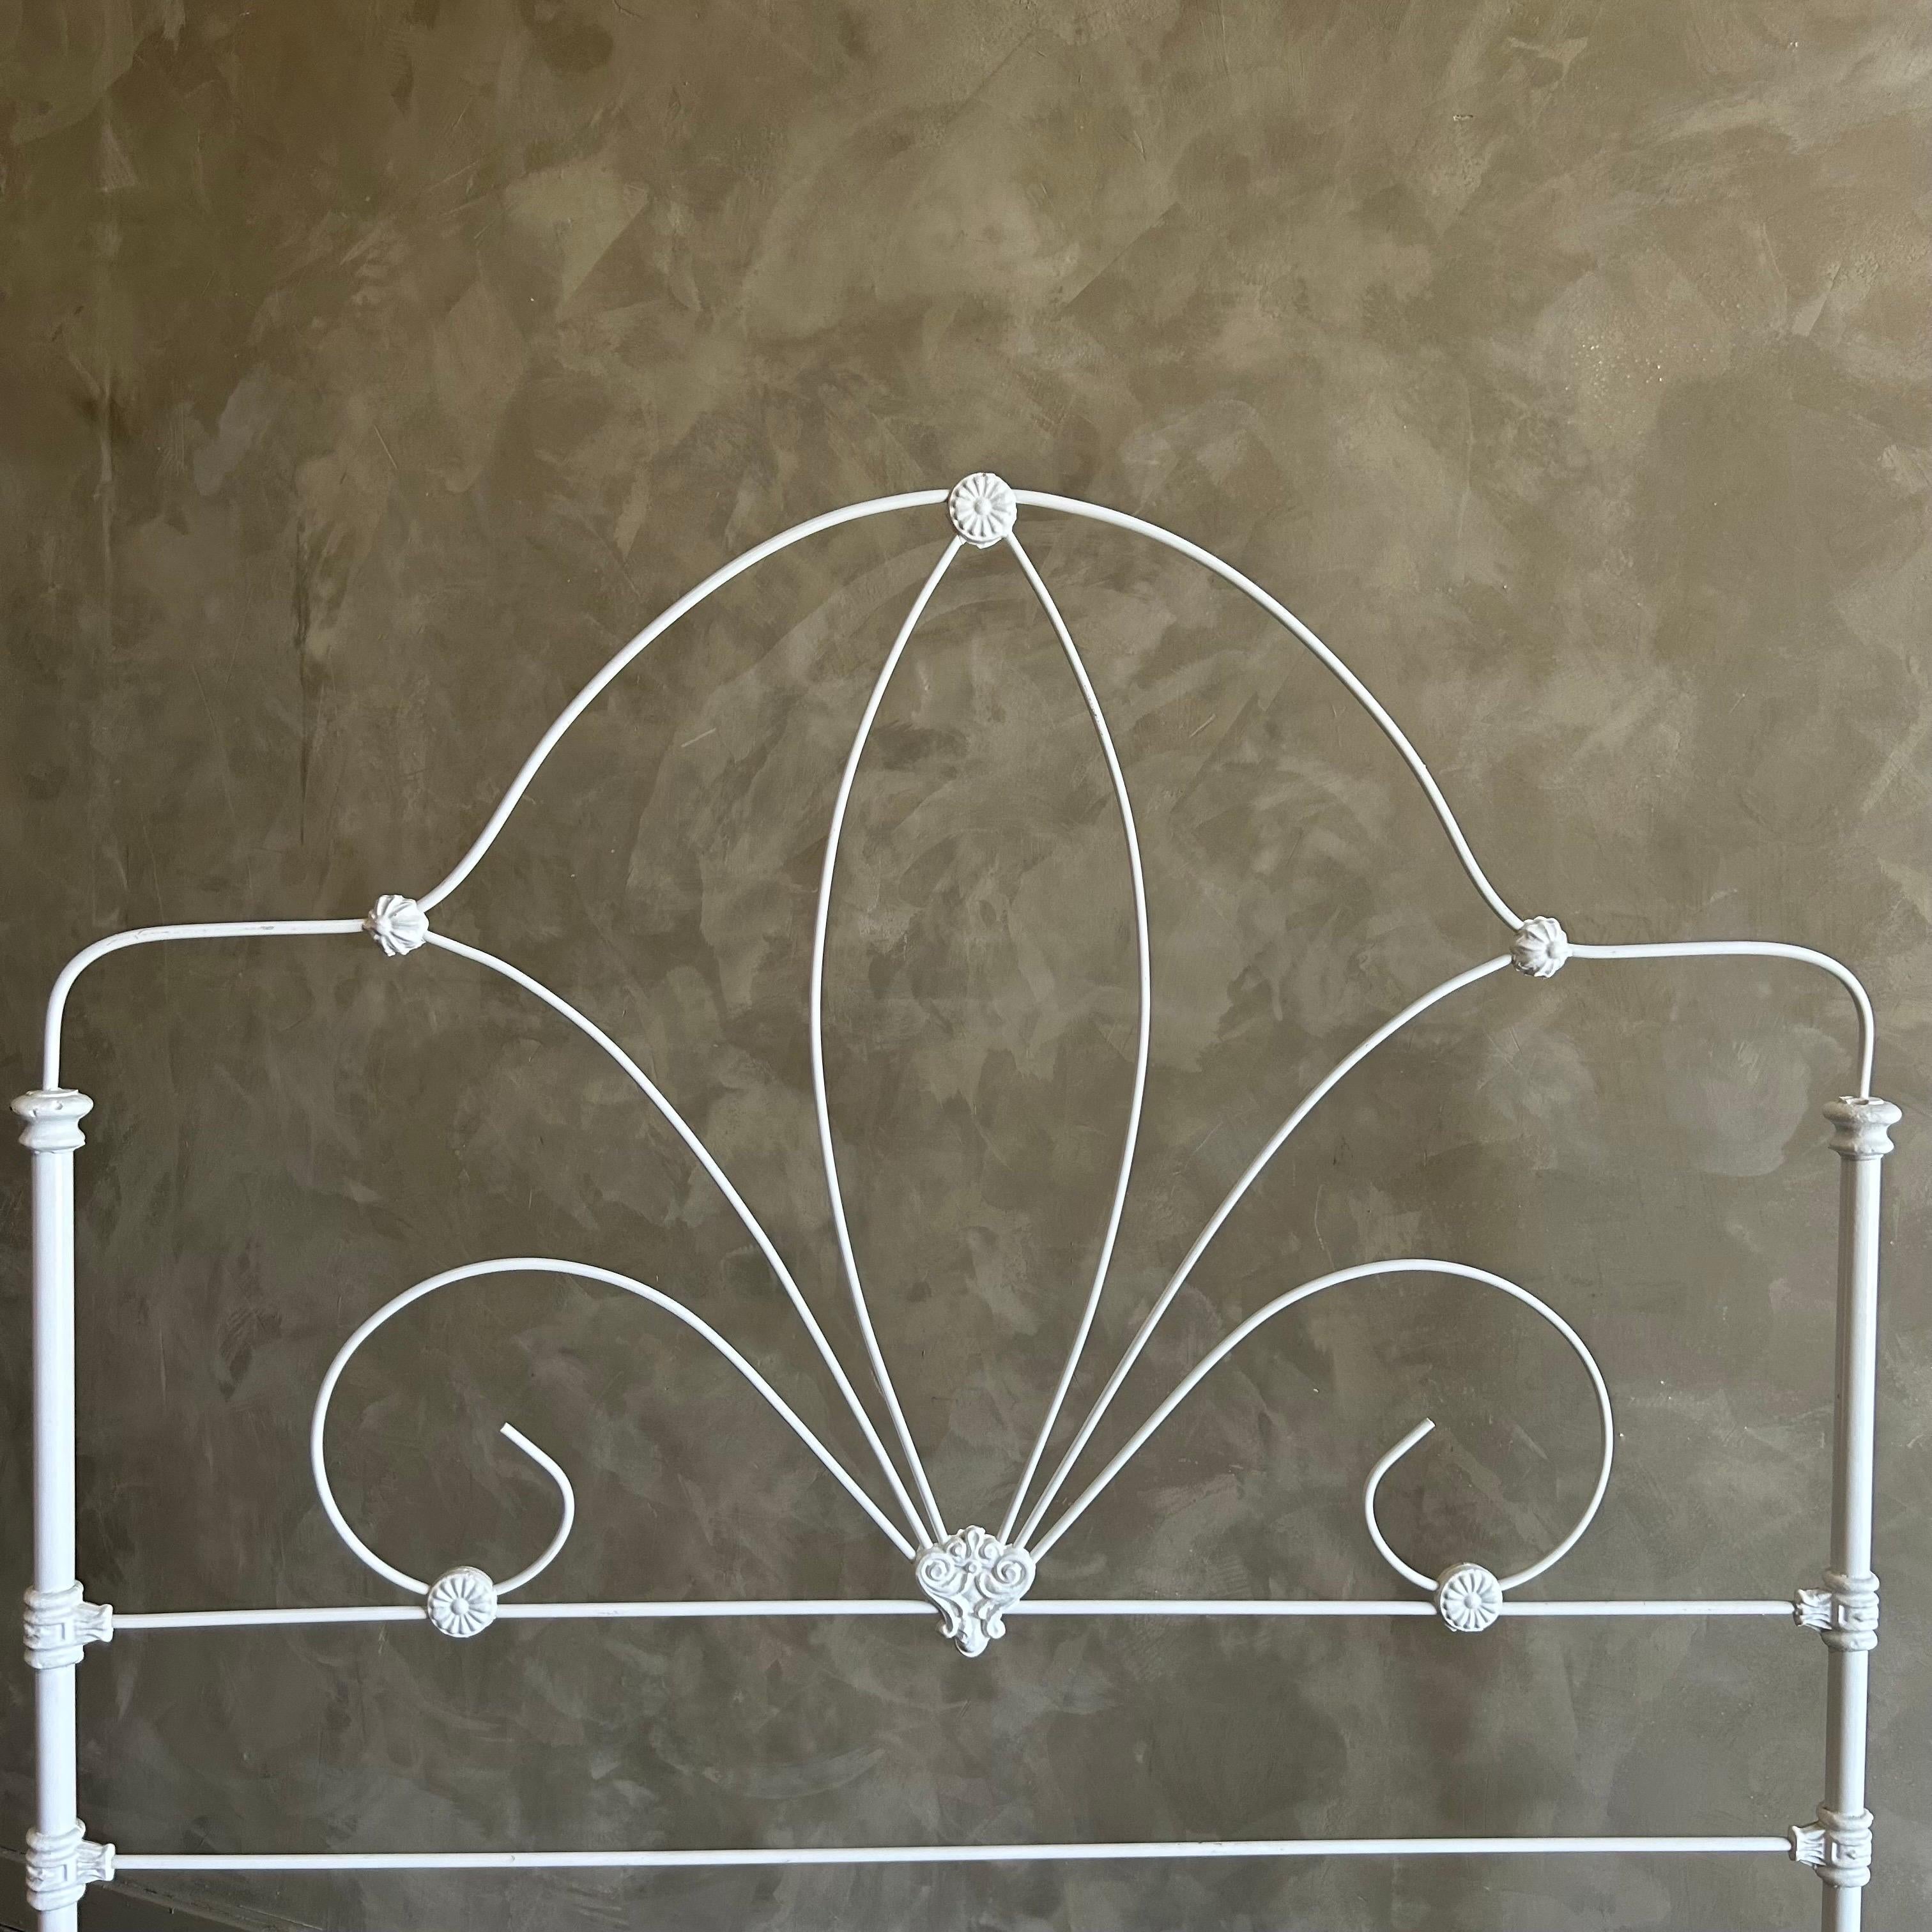 Antique Iron bed full size 54”w x 78”d x 64”h
Footboard: 51”h
White painted Finish with original wheels, can be removed if wanted.
Original side rails that drop into place, no hardware needed, this bed is structurally sound and sturdy when